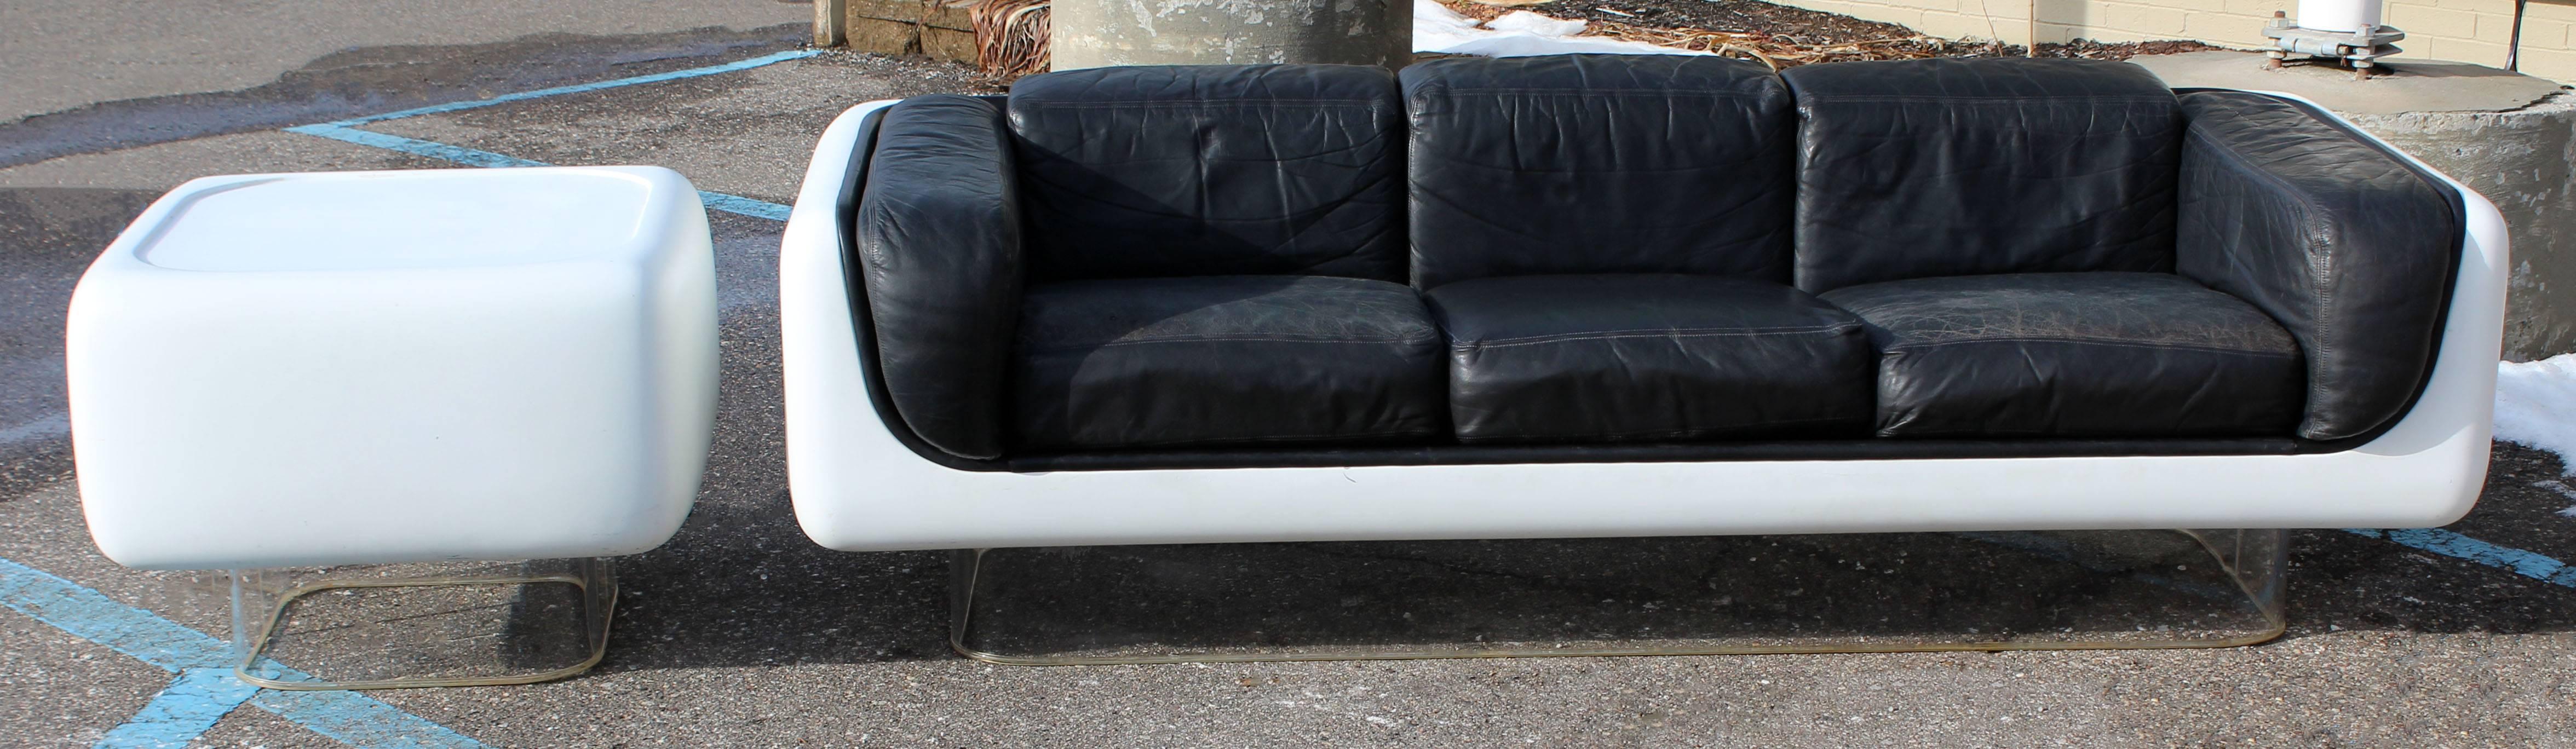 For your consideration is a rare William Andrus for Steelcase, chic and cool, fiberglass floating sofa on a Lucite base with original leather with the perfect age patina to the leather. Also comes with matching fiberglass and Lucite end table, circa